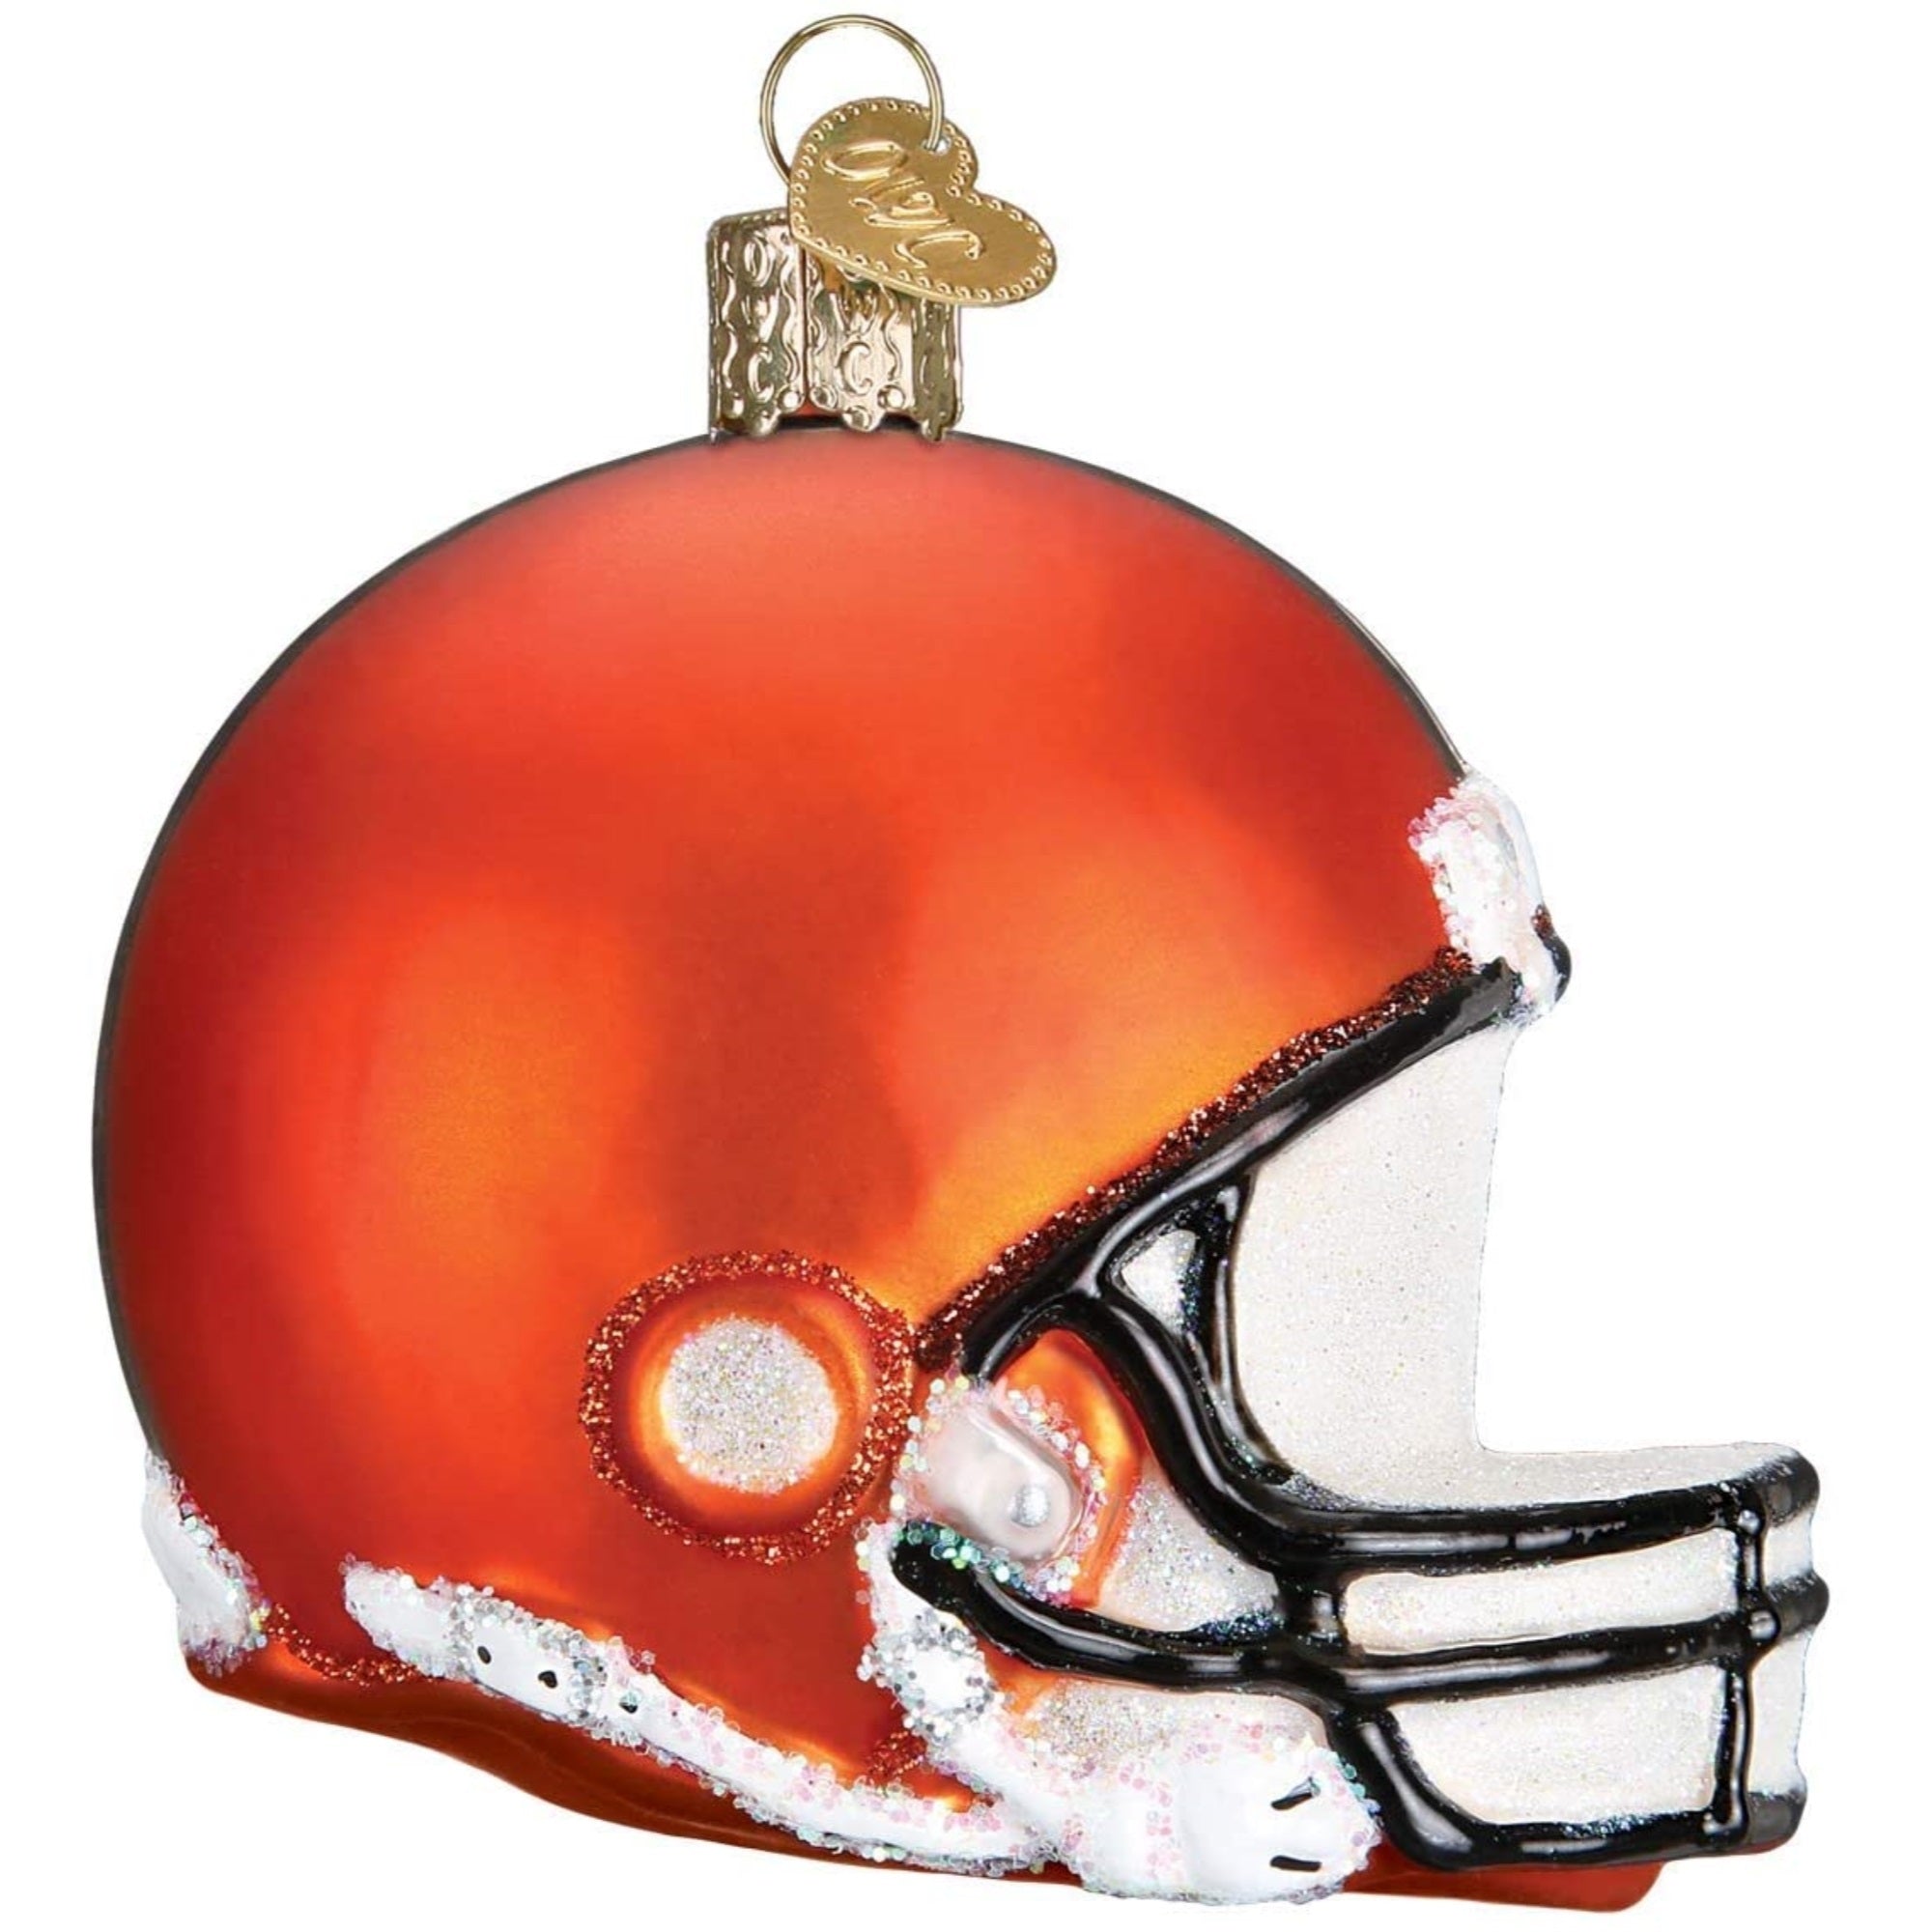 Old World Christmas Cleveland Browns Helmet Ornament For Christmas Tree